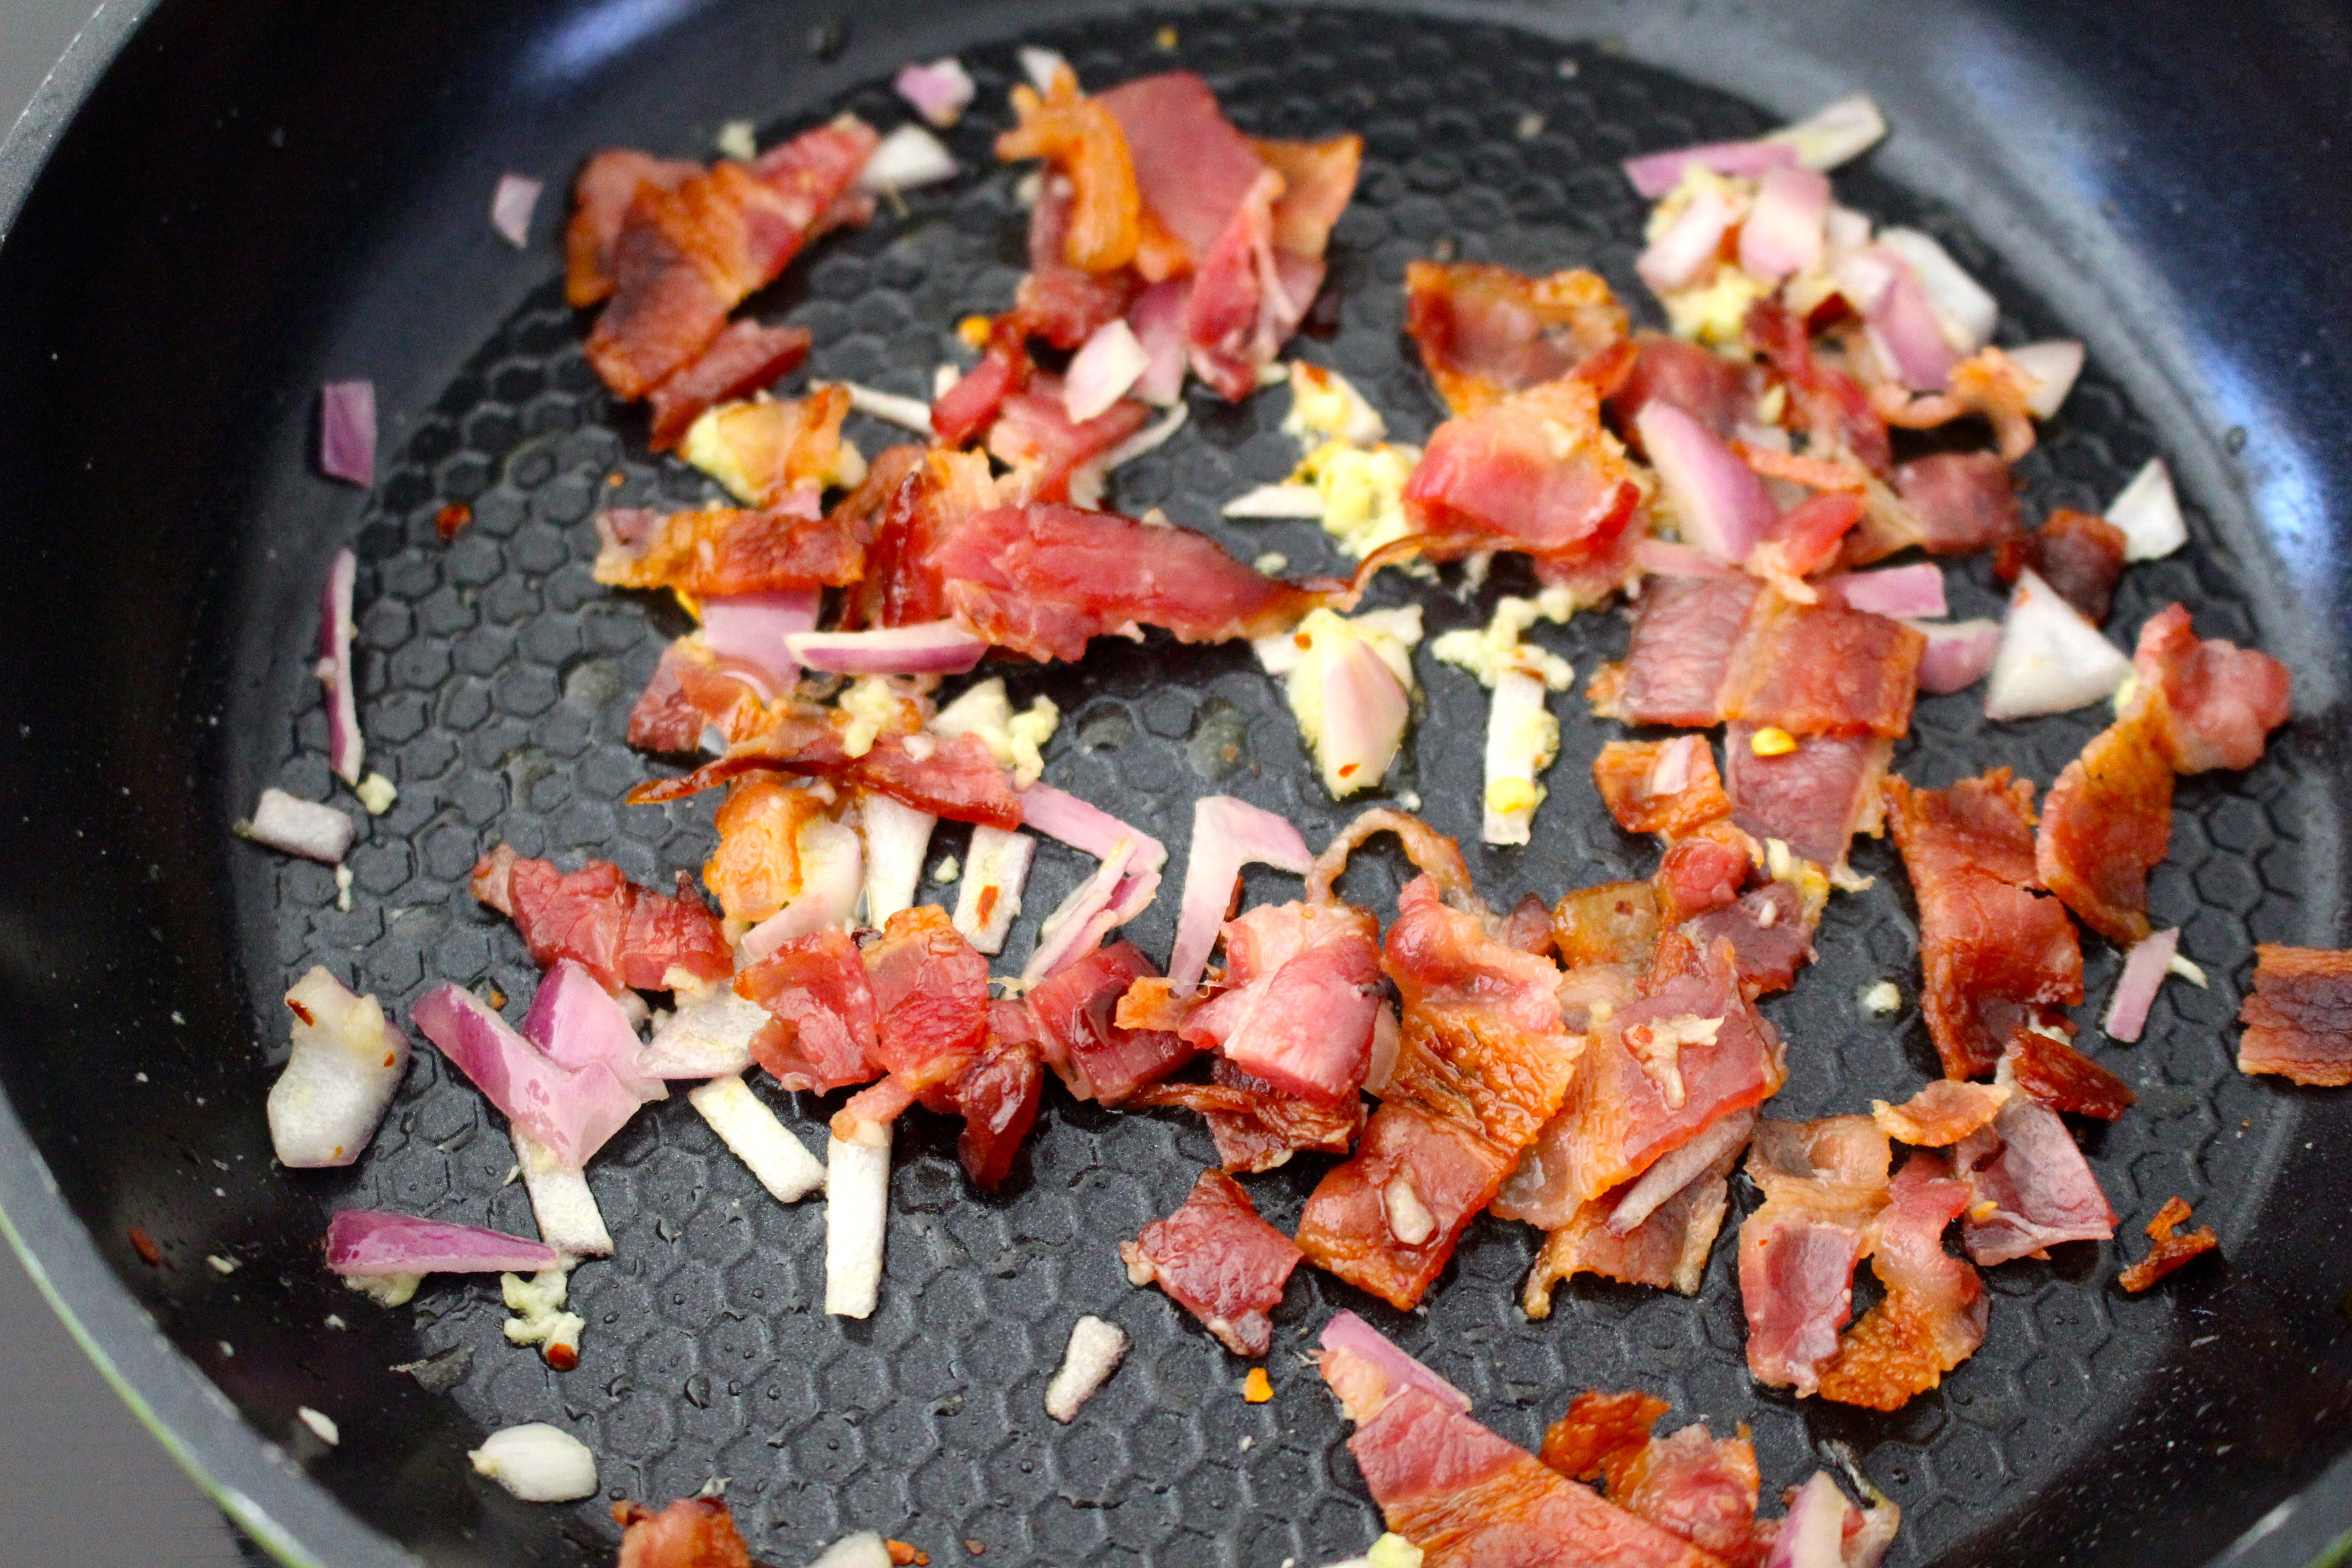 Bacon cooking with red onion and garlic